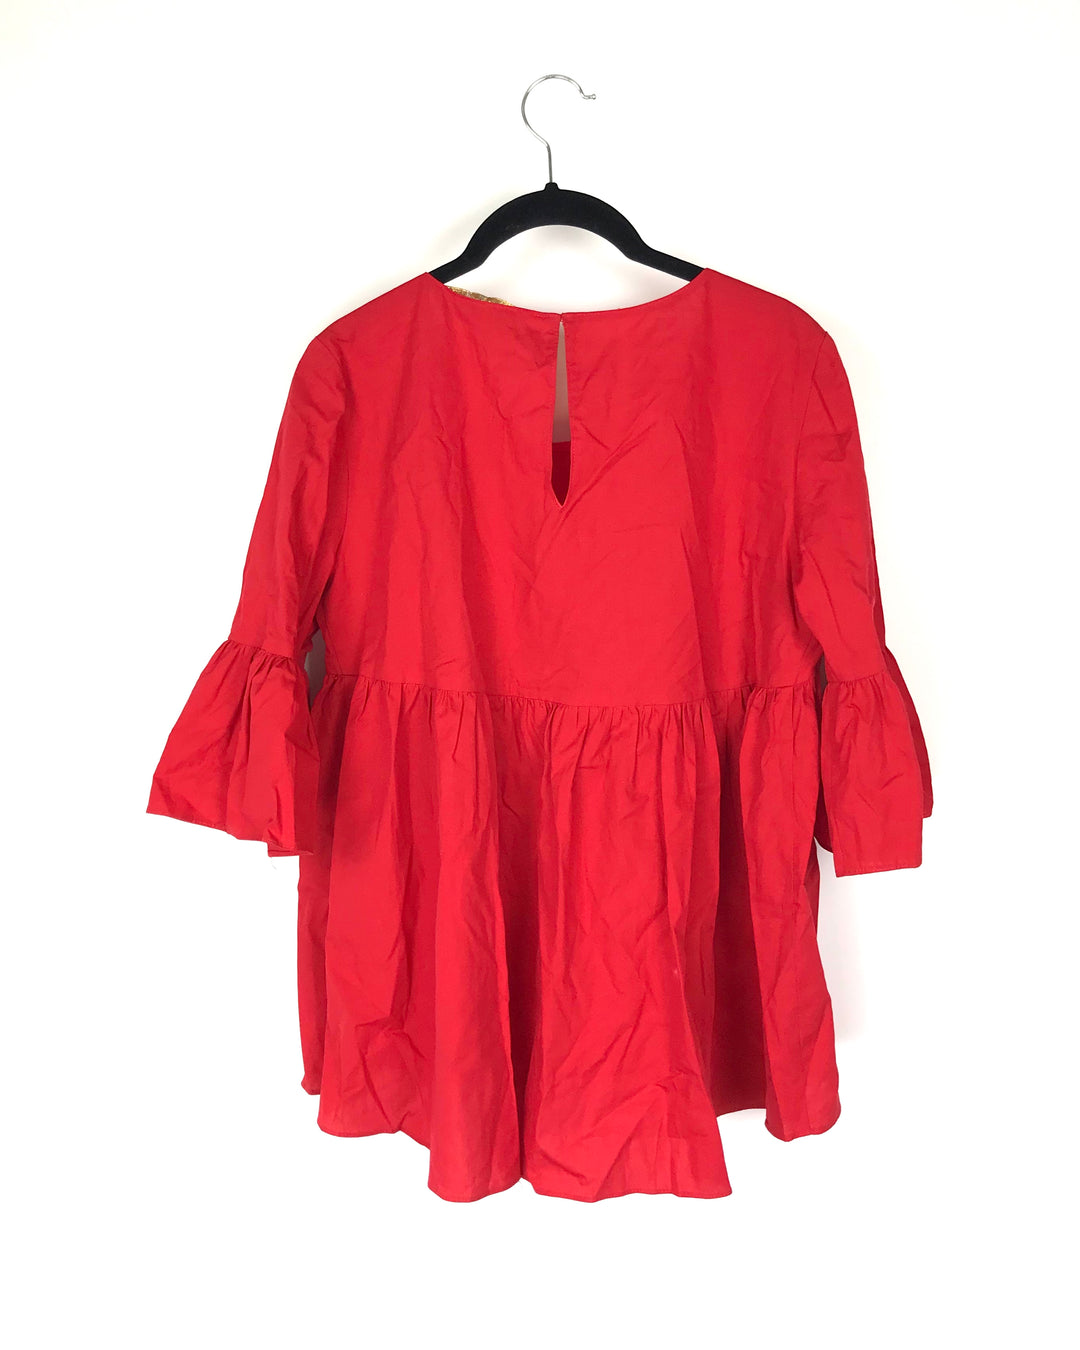 Red Blouse - Small